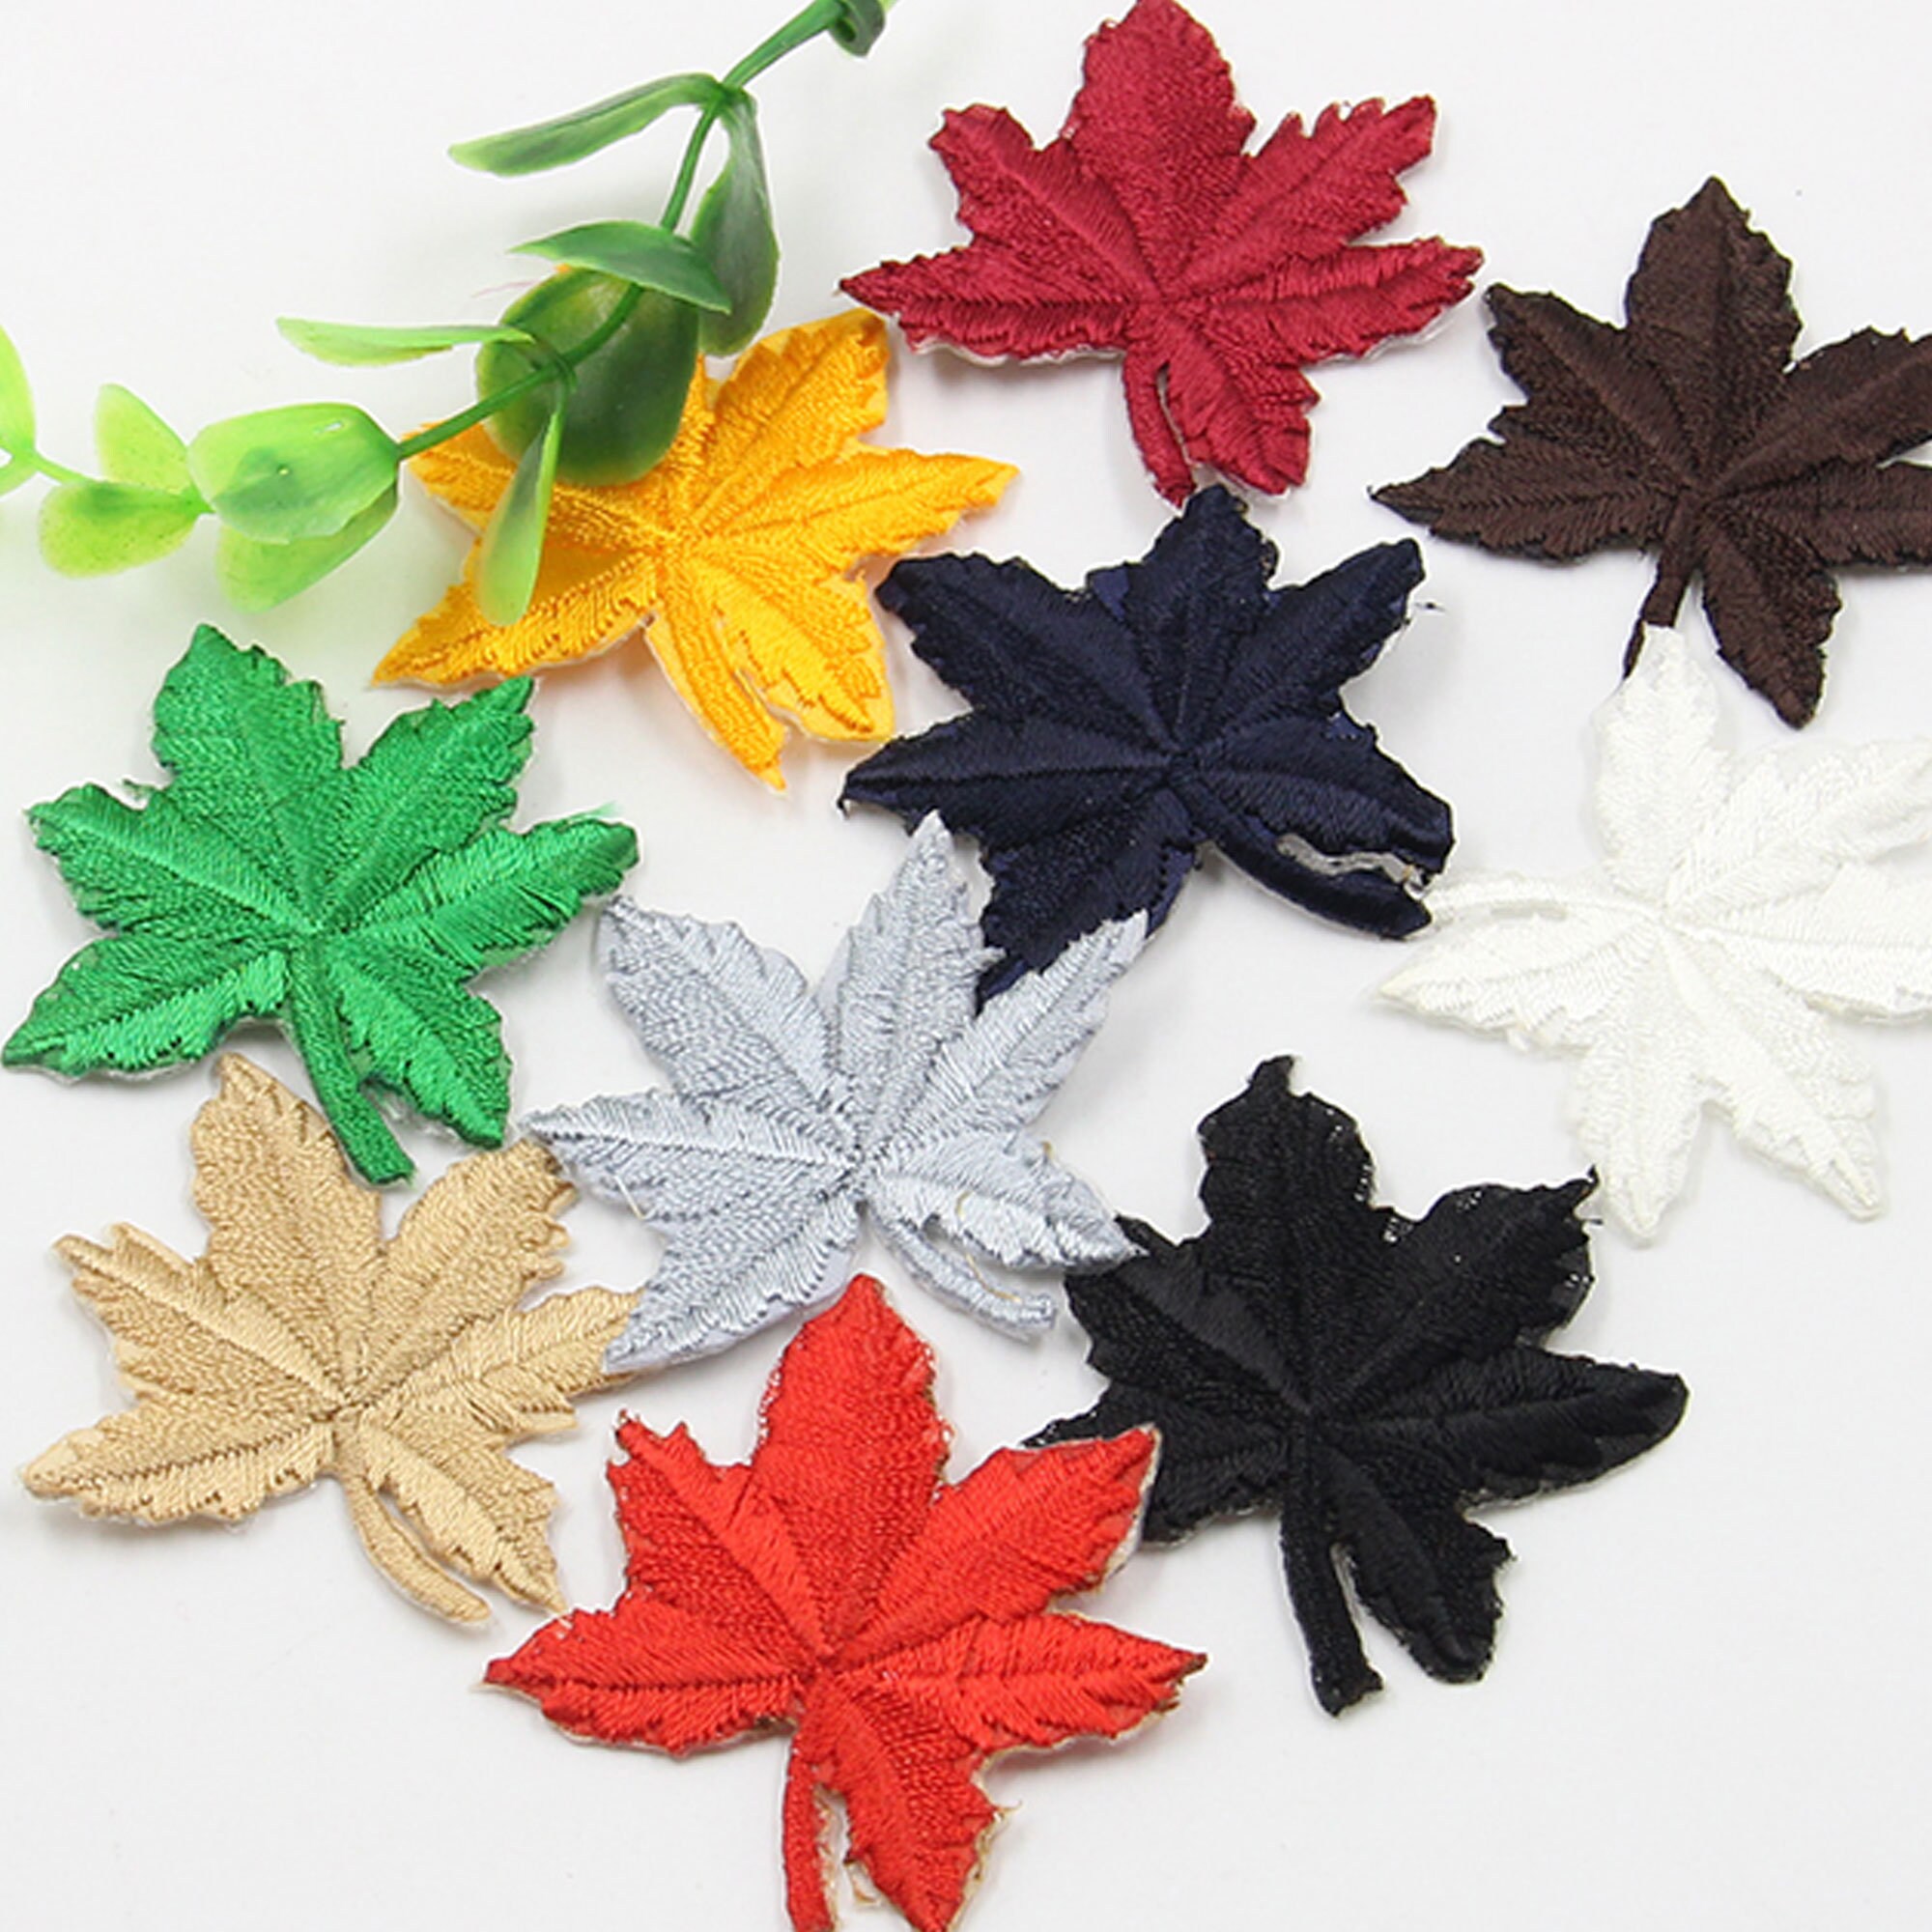 Iron Patches Clothing Leaf, Patch Clothes Maple Leaf